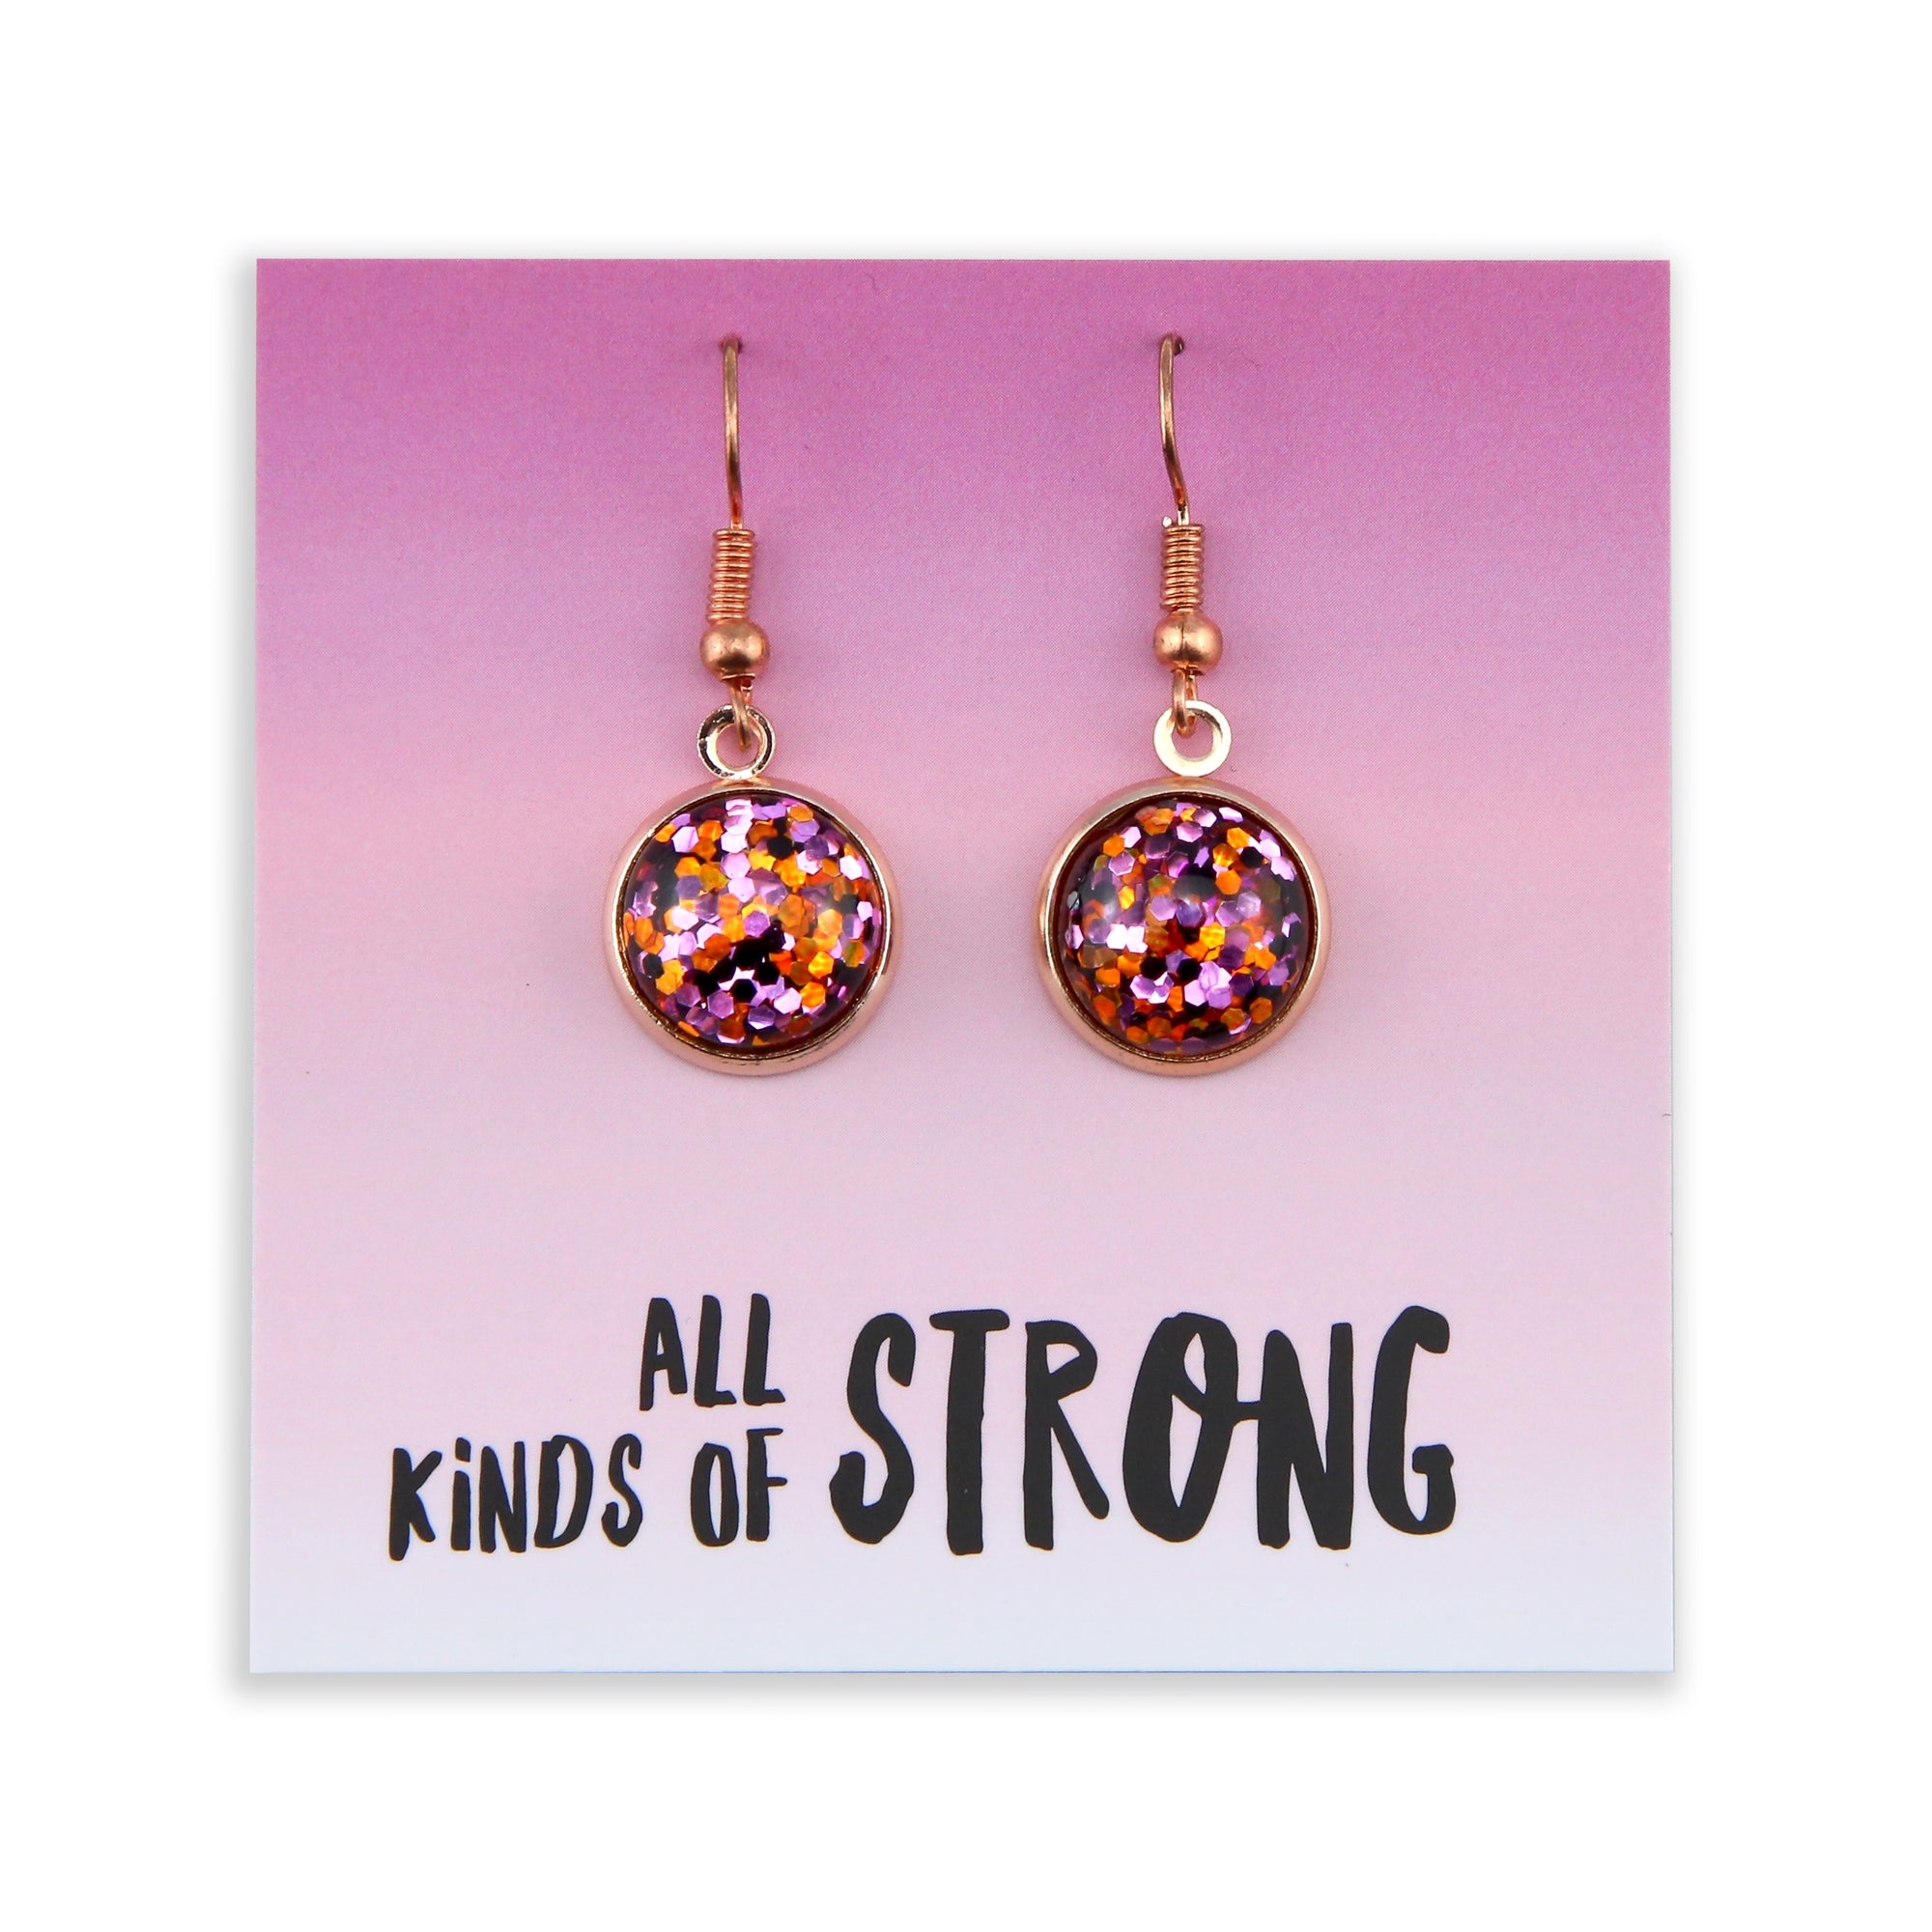 SPARKLEFEST - Dangles - All Kinds of Strong - Stainless Steel Rose Gold Earrings - Dazzle Pop (2104-R)